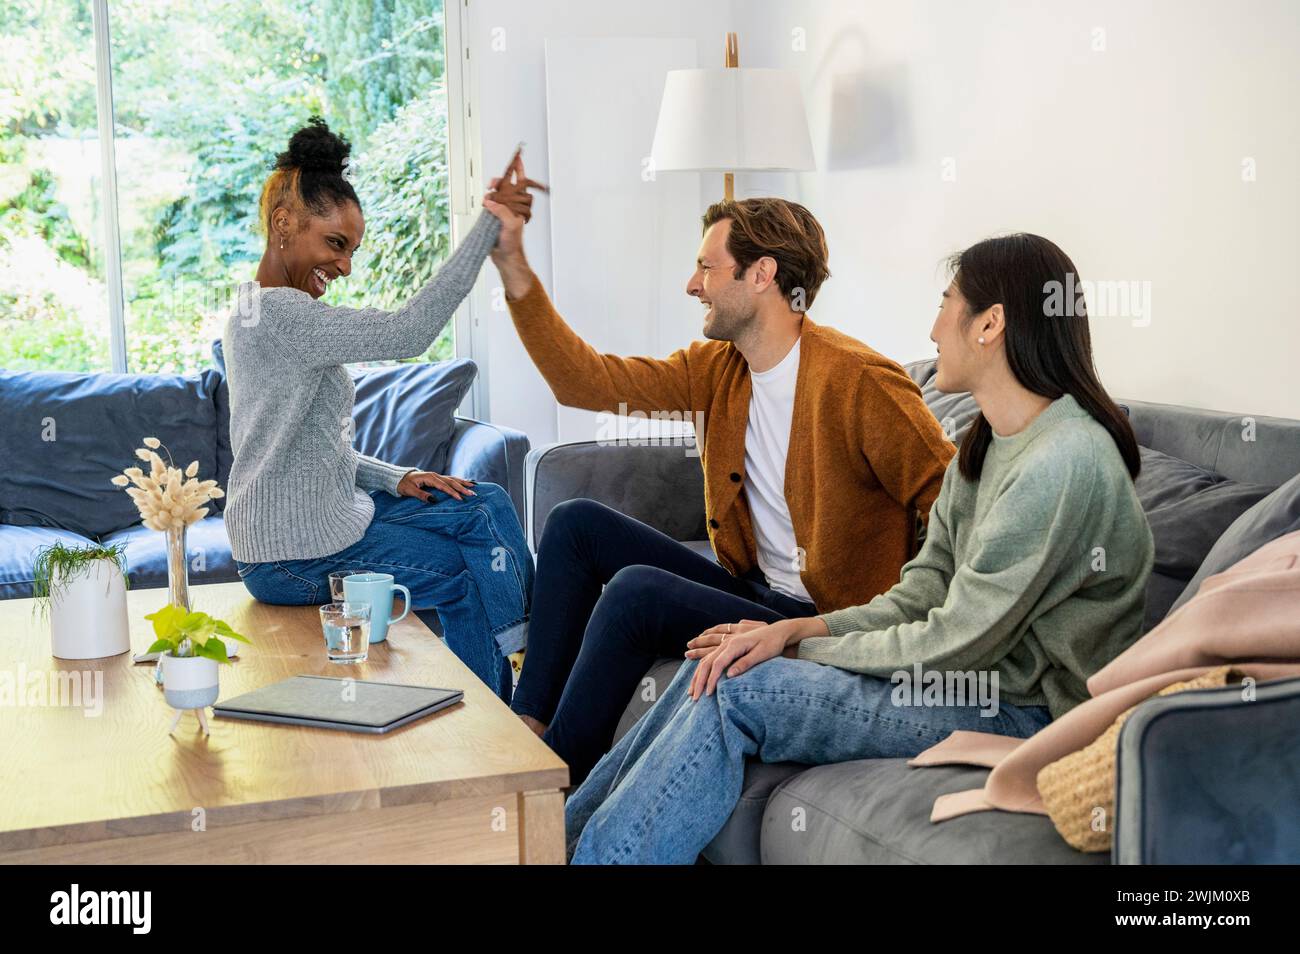 Adult man high fiving with friend during reunion at living room Stock Photo